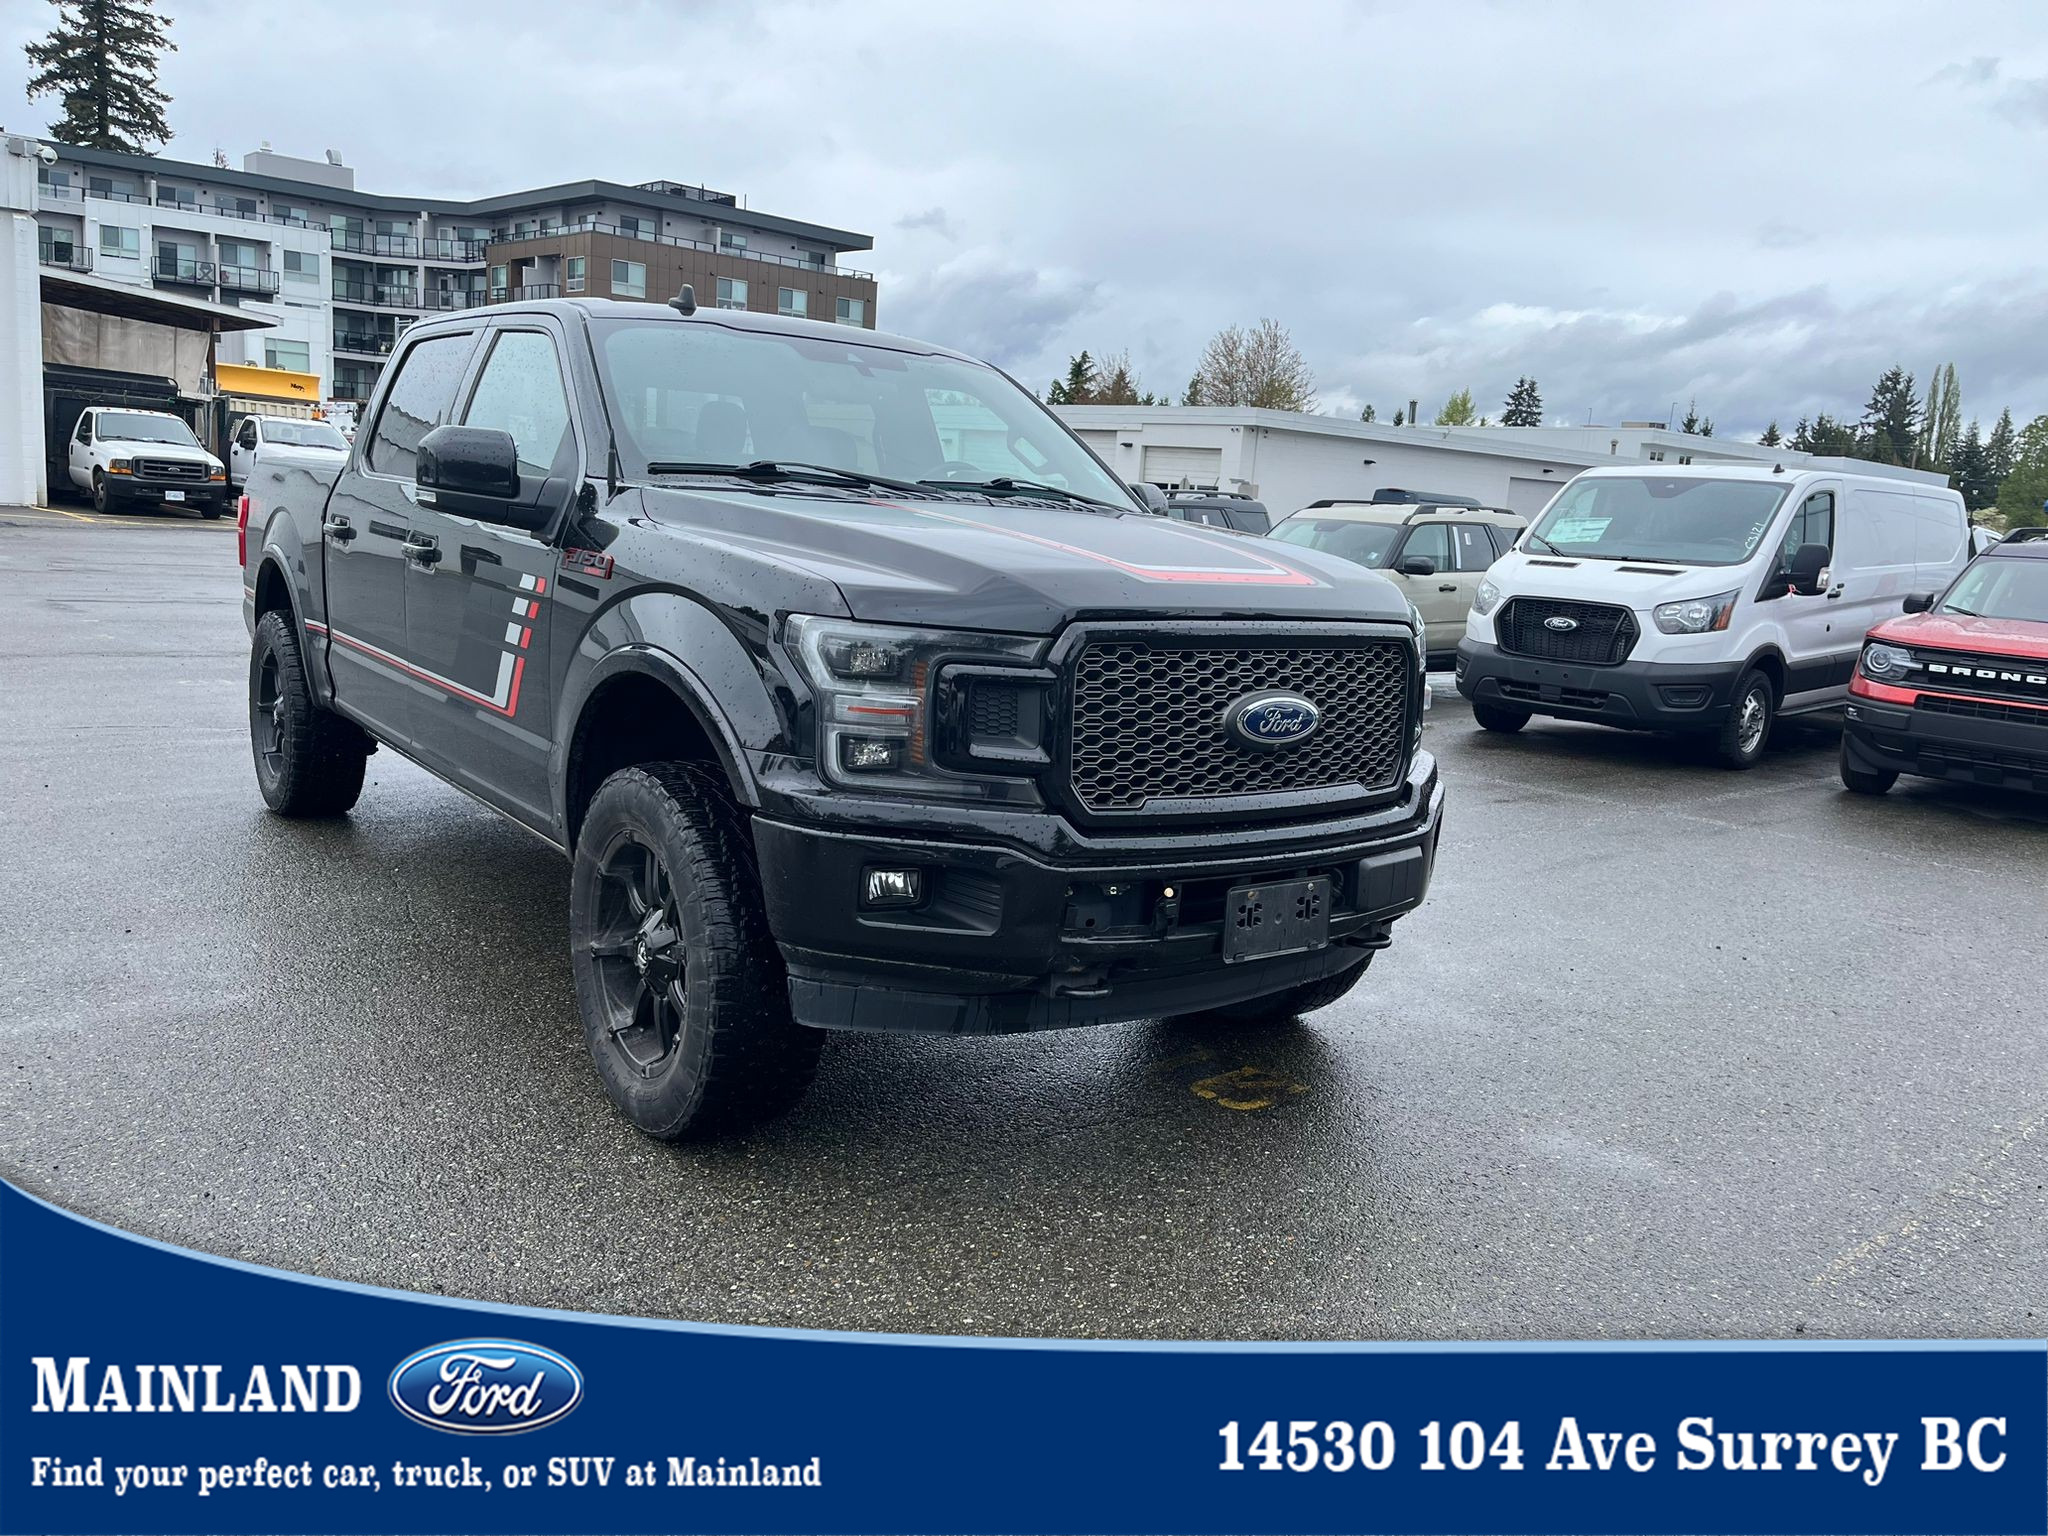 2019 Ford F-150 Lariat LARIAT SPECIAL EDITION | FX4 PACKAGE